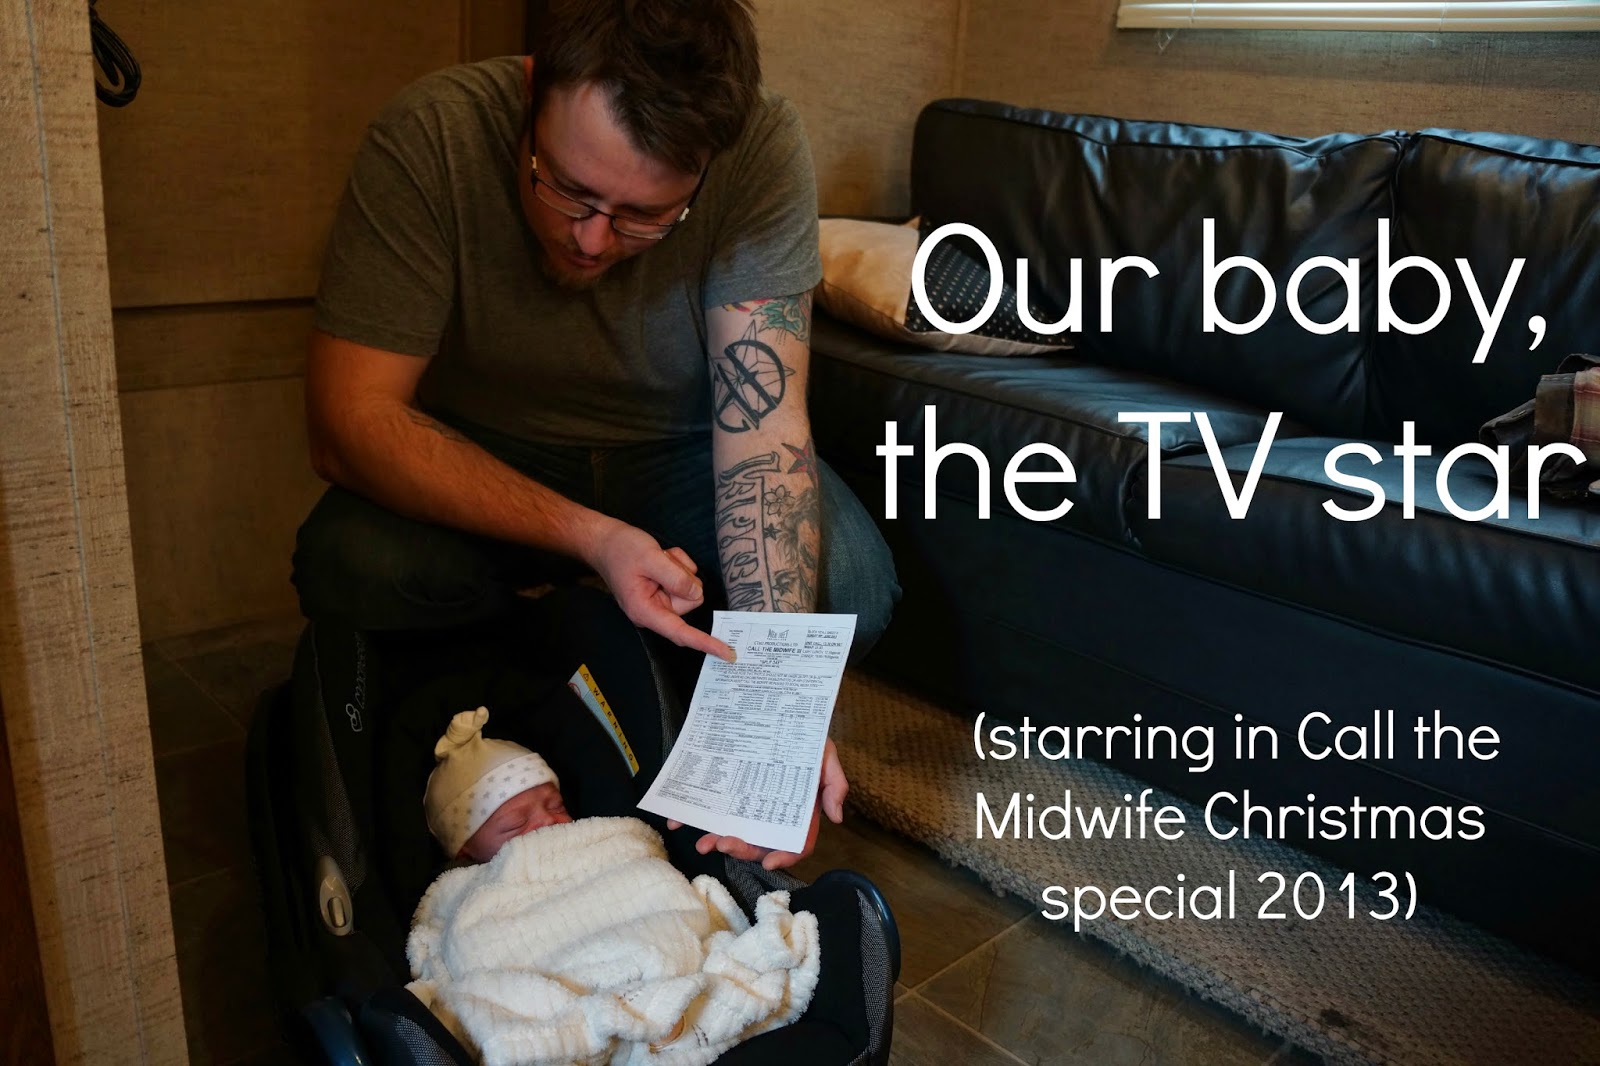 http://www.wavetomummy.com/2014/12/our-baby-tv-star.html